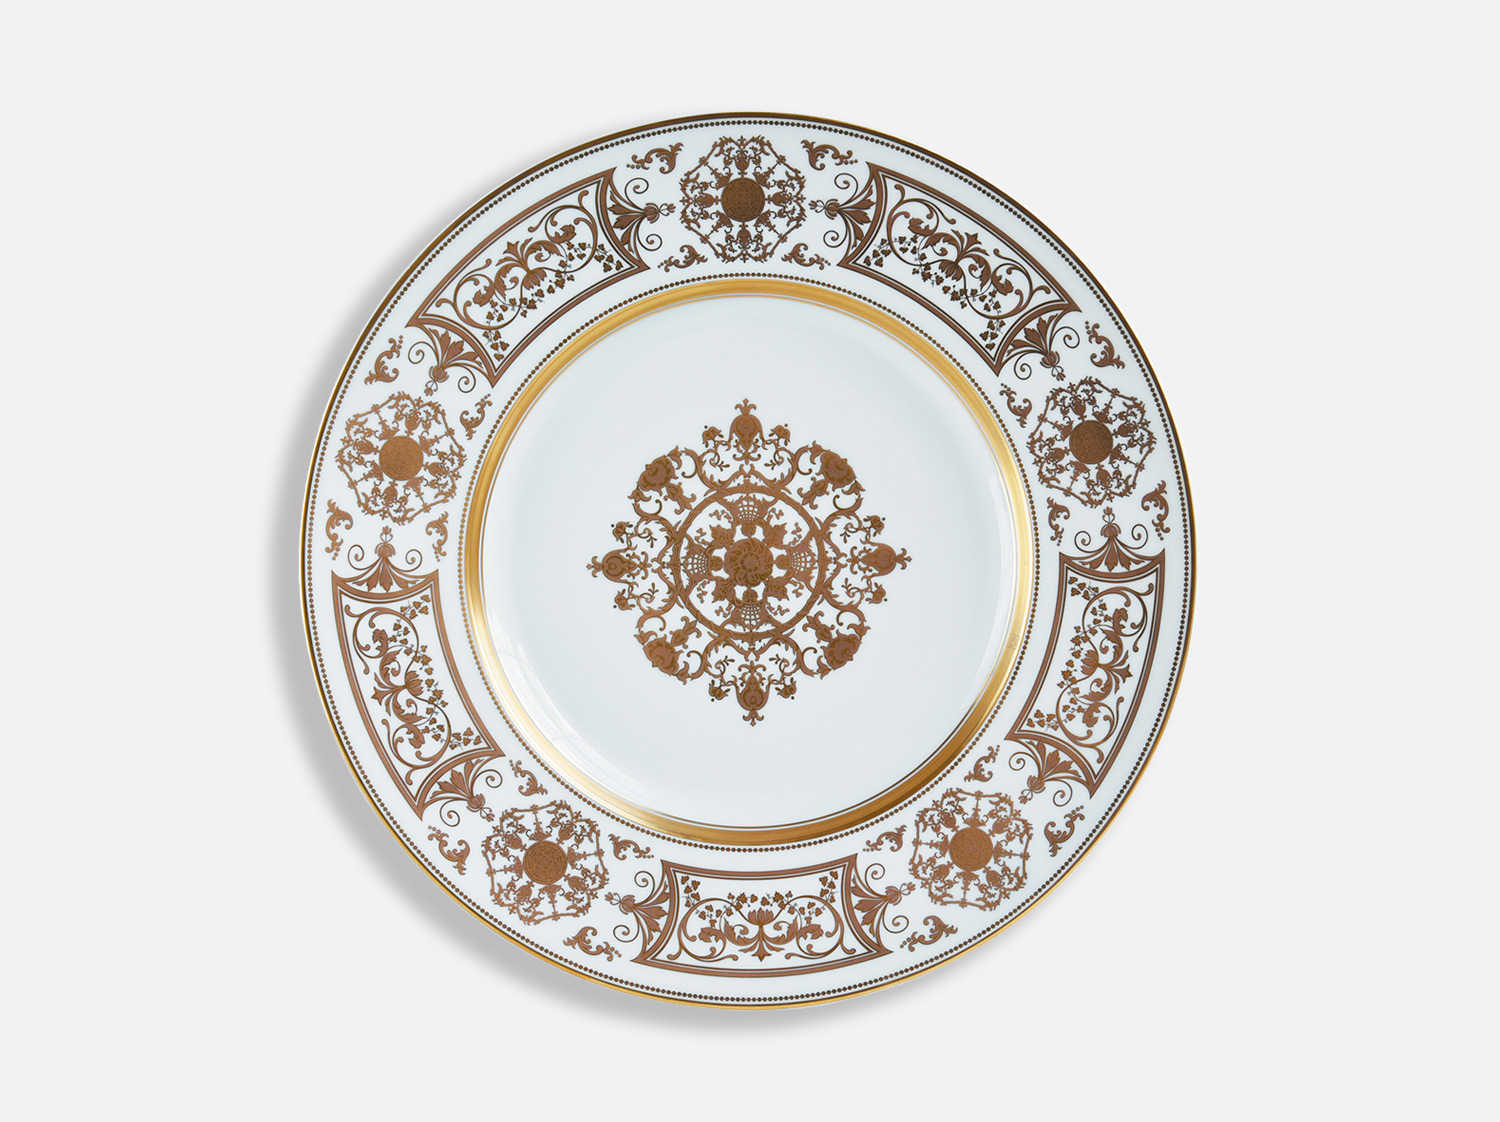 China Oversized service plate 12.5'' of the collection Aux Rois Or | Bernardaud